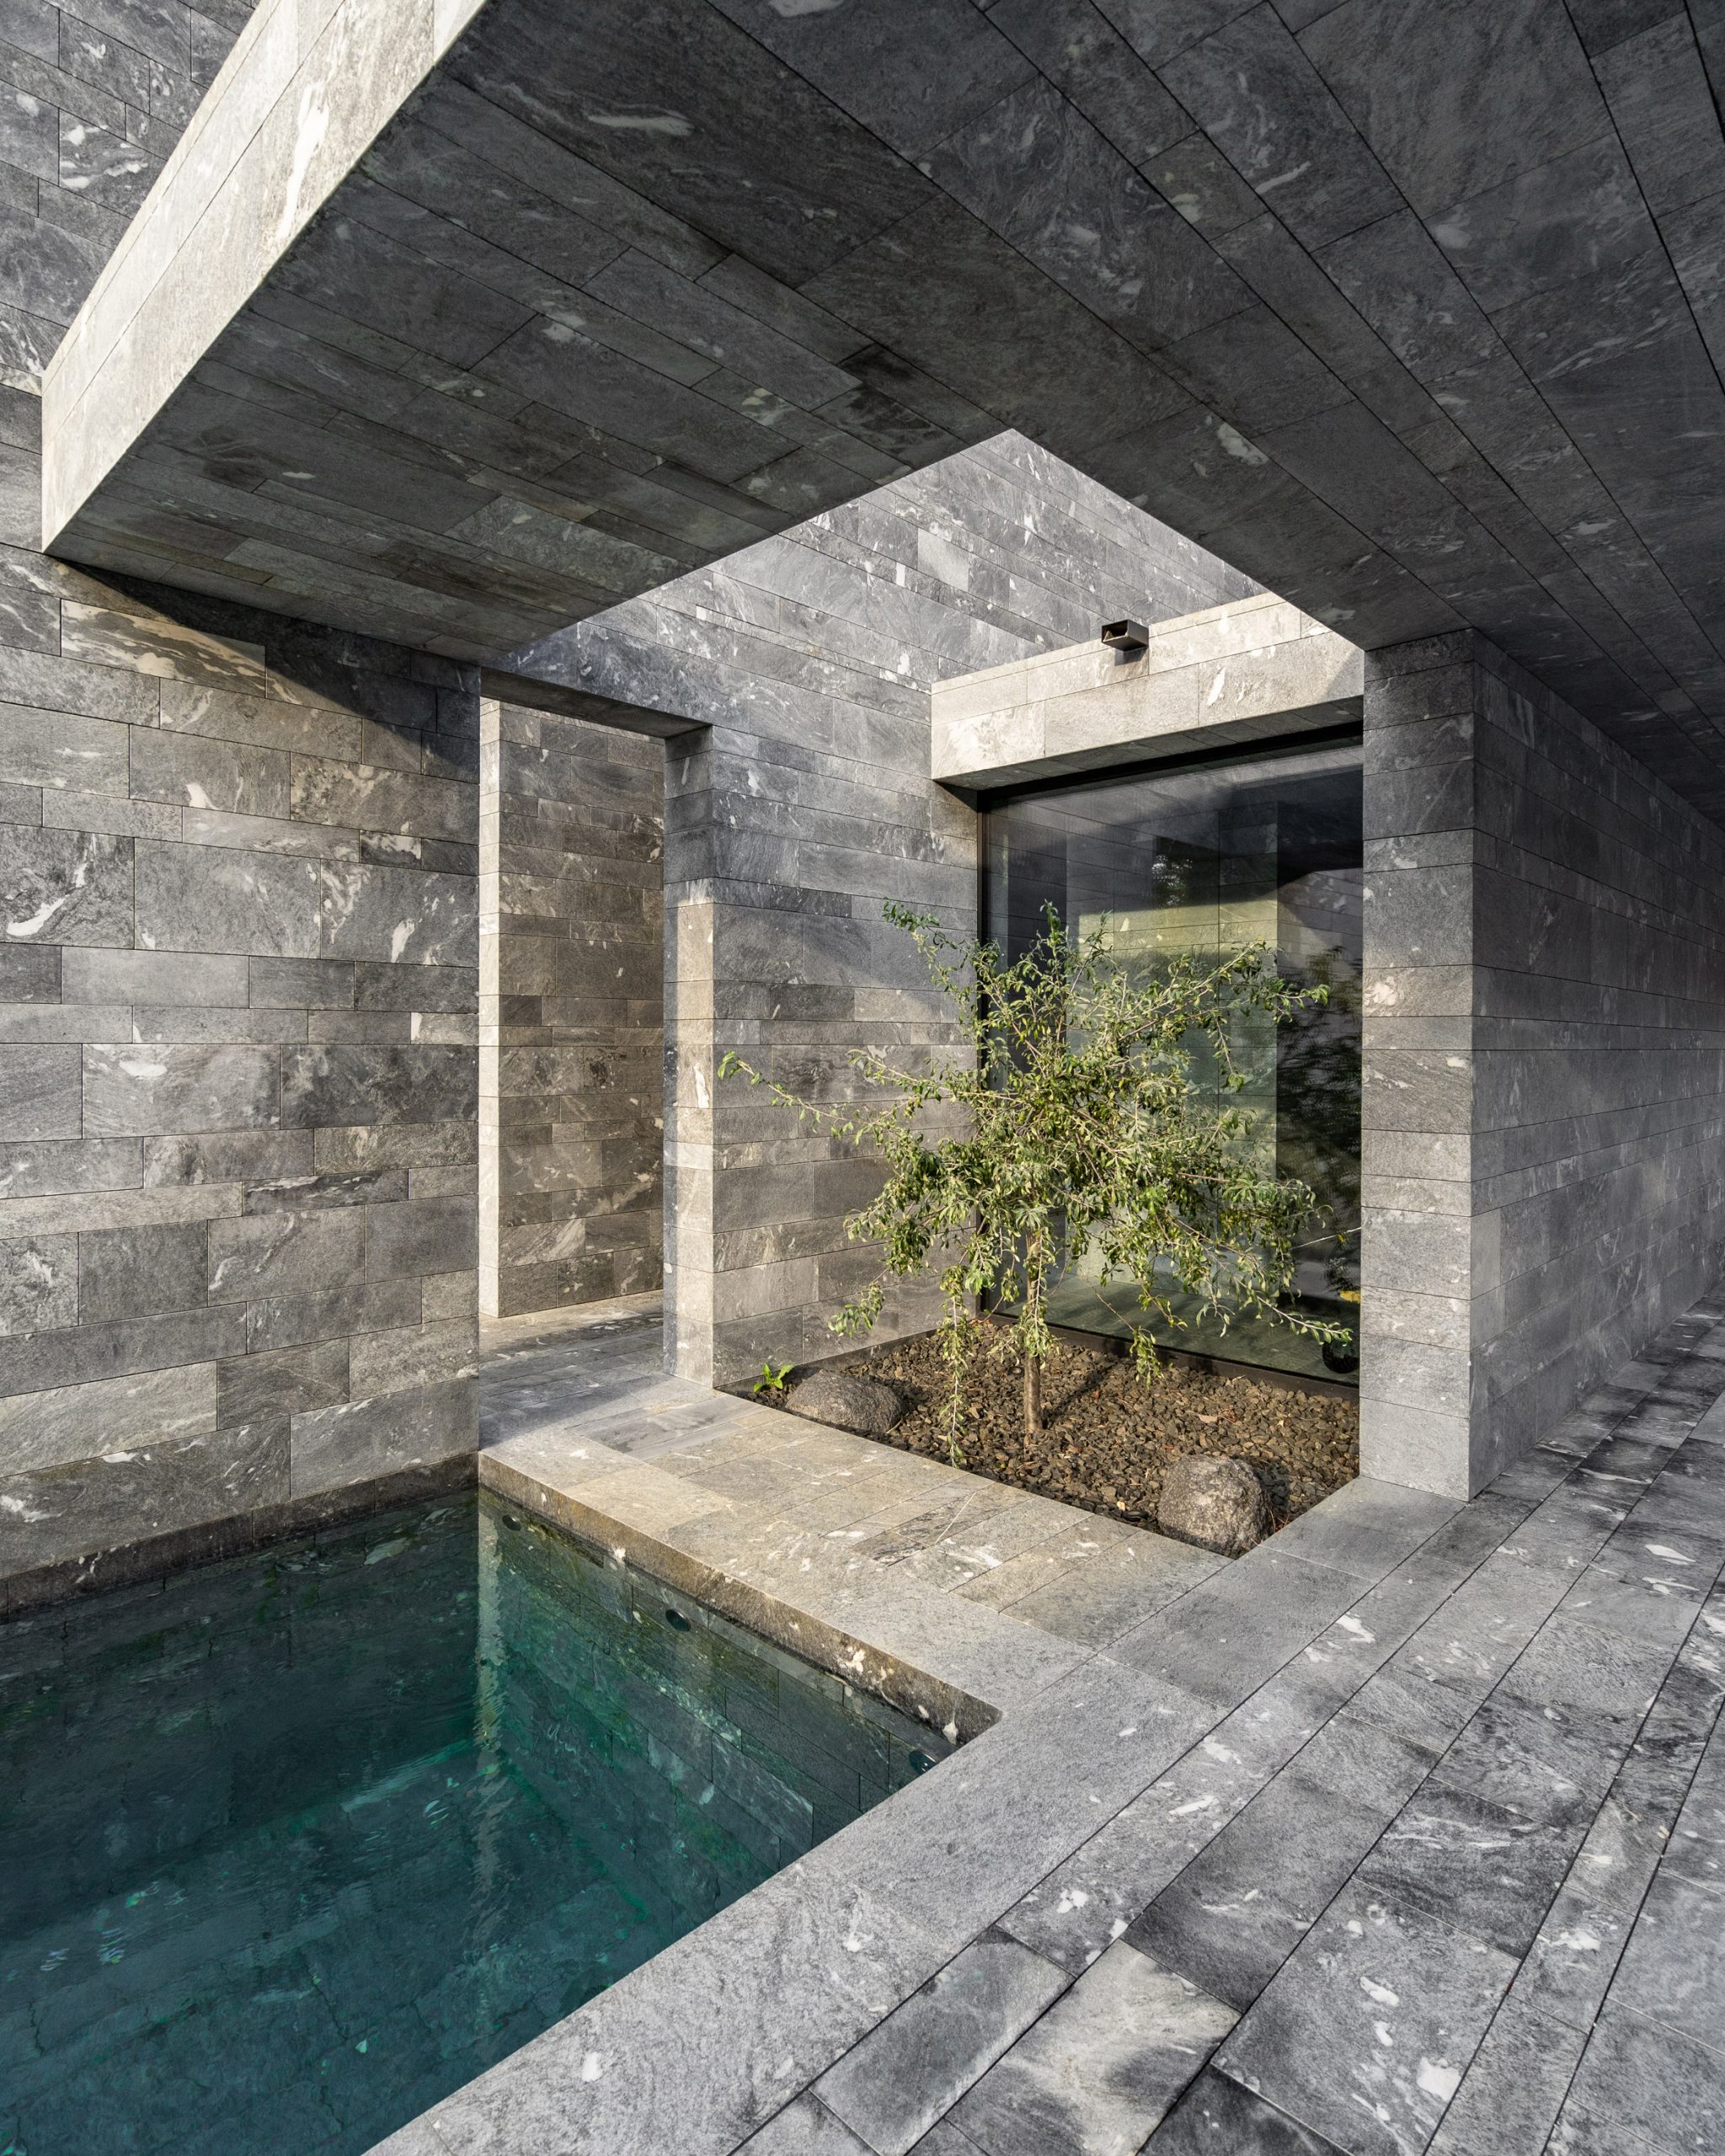 The stone-walled interiors of monolithic private spa